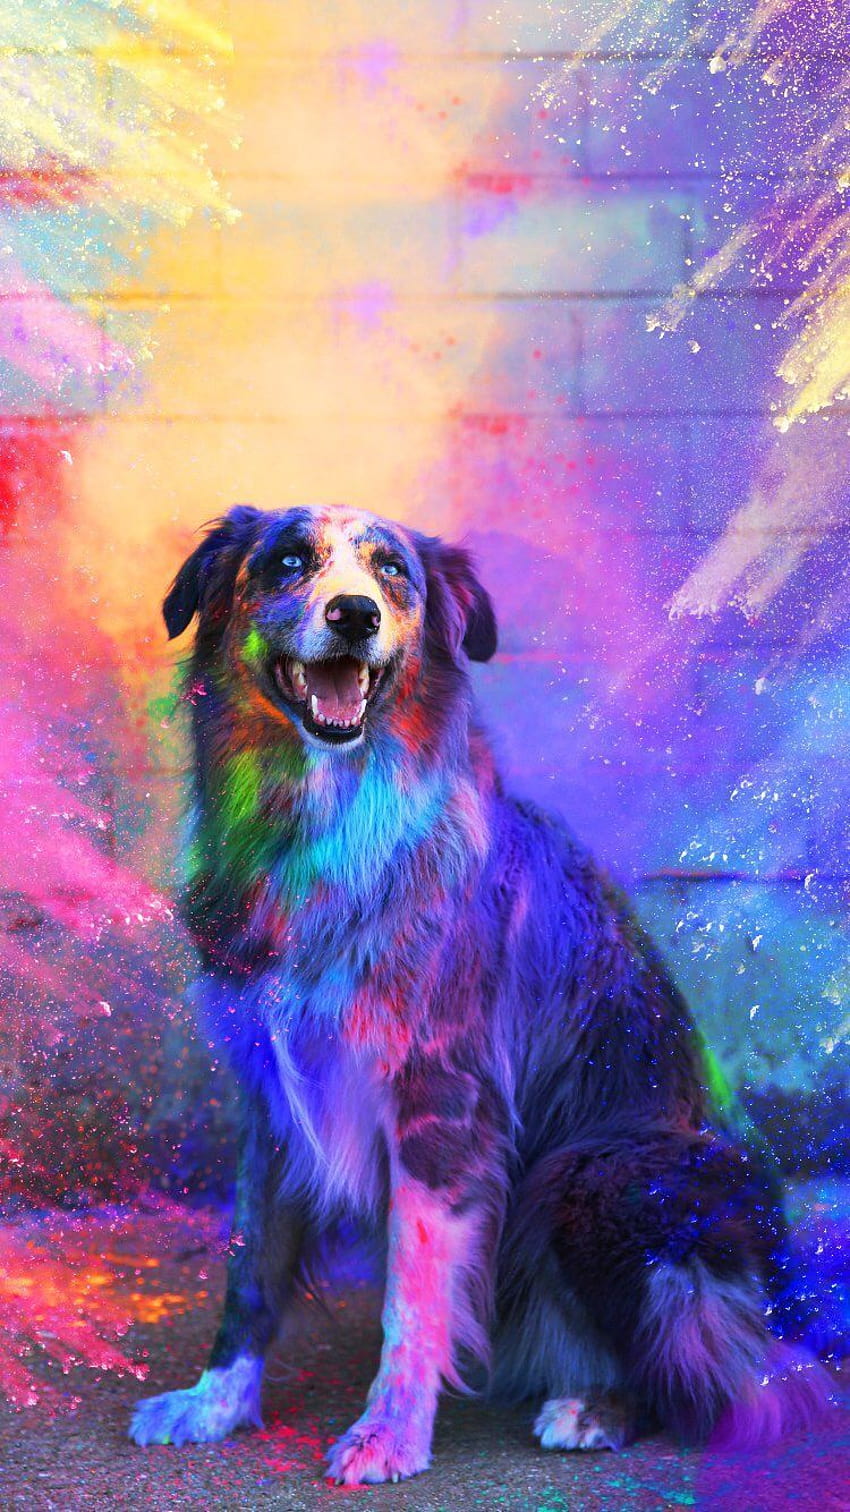 Colorful Dog on Dog, colorful dog painting HD phone wallpaper